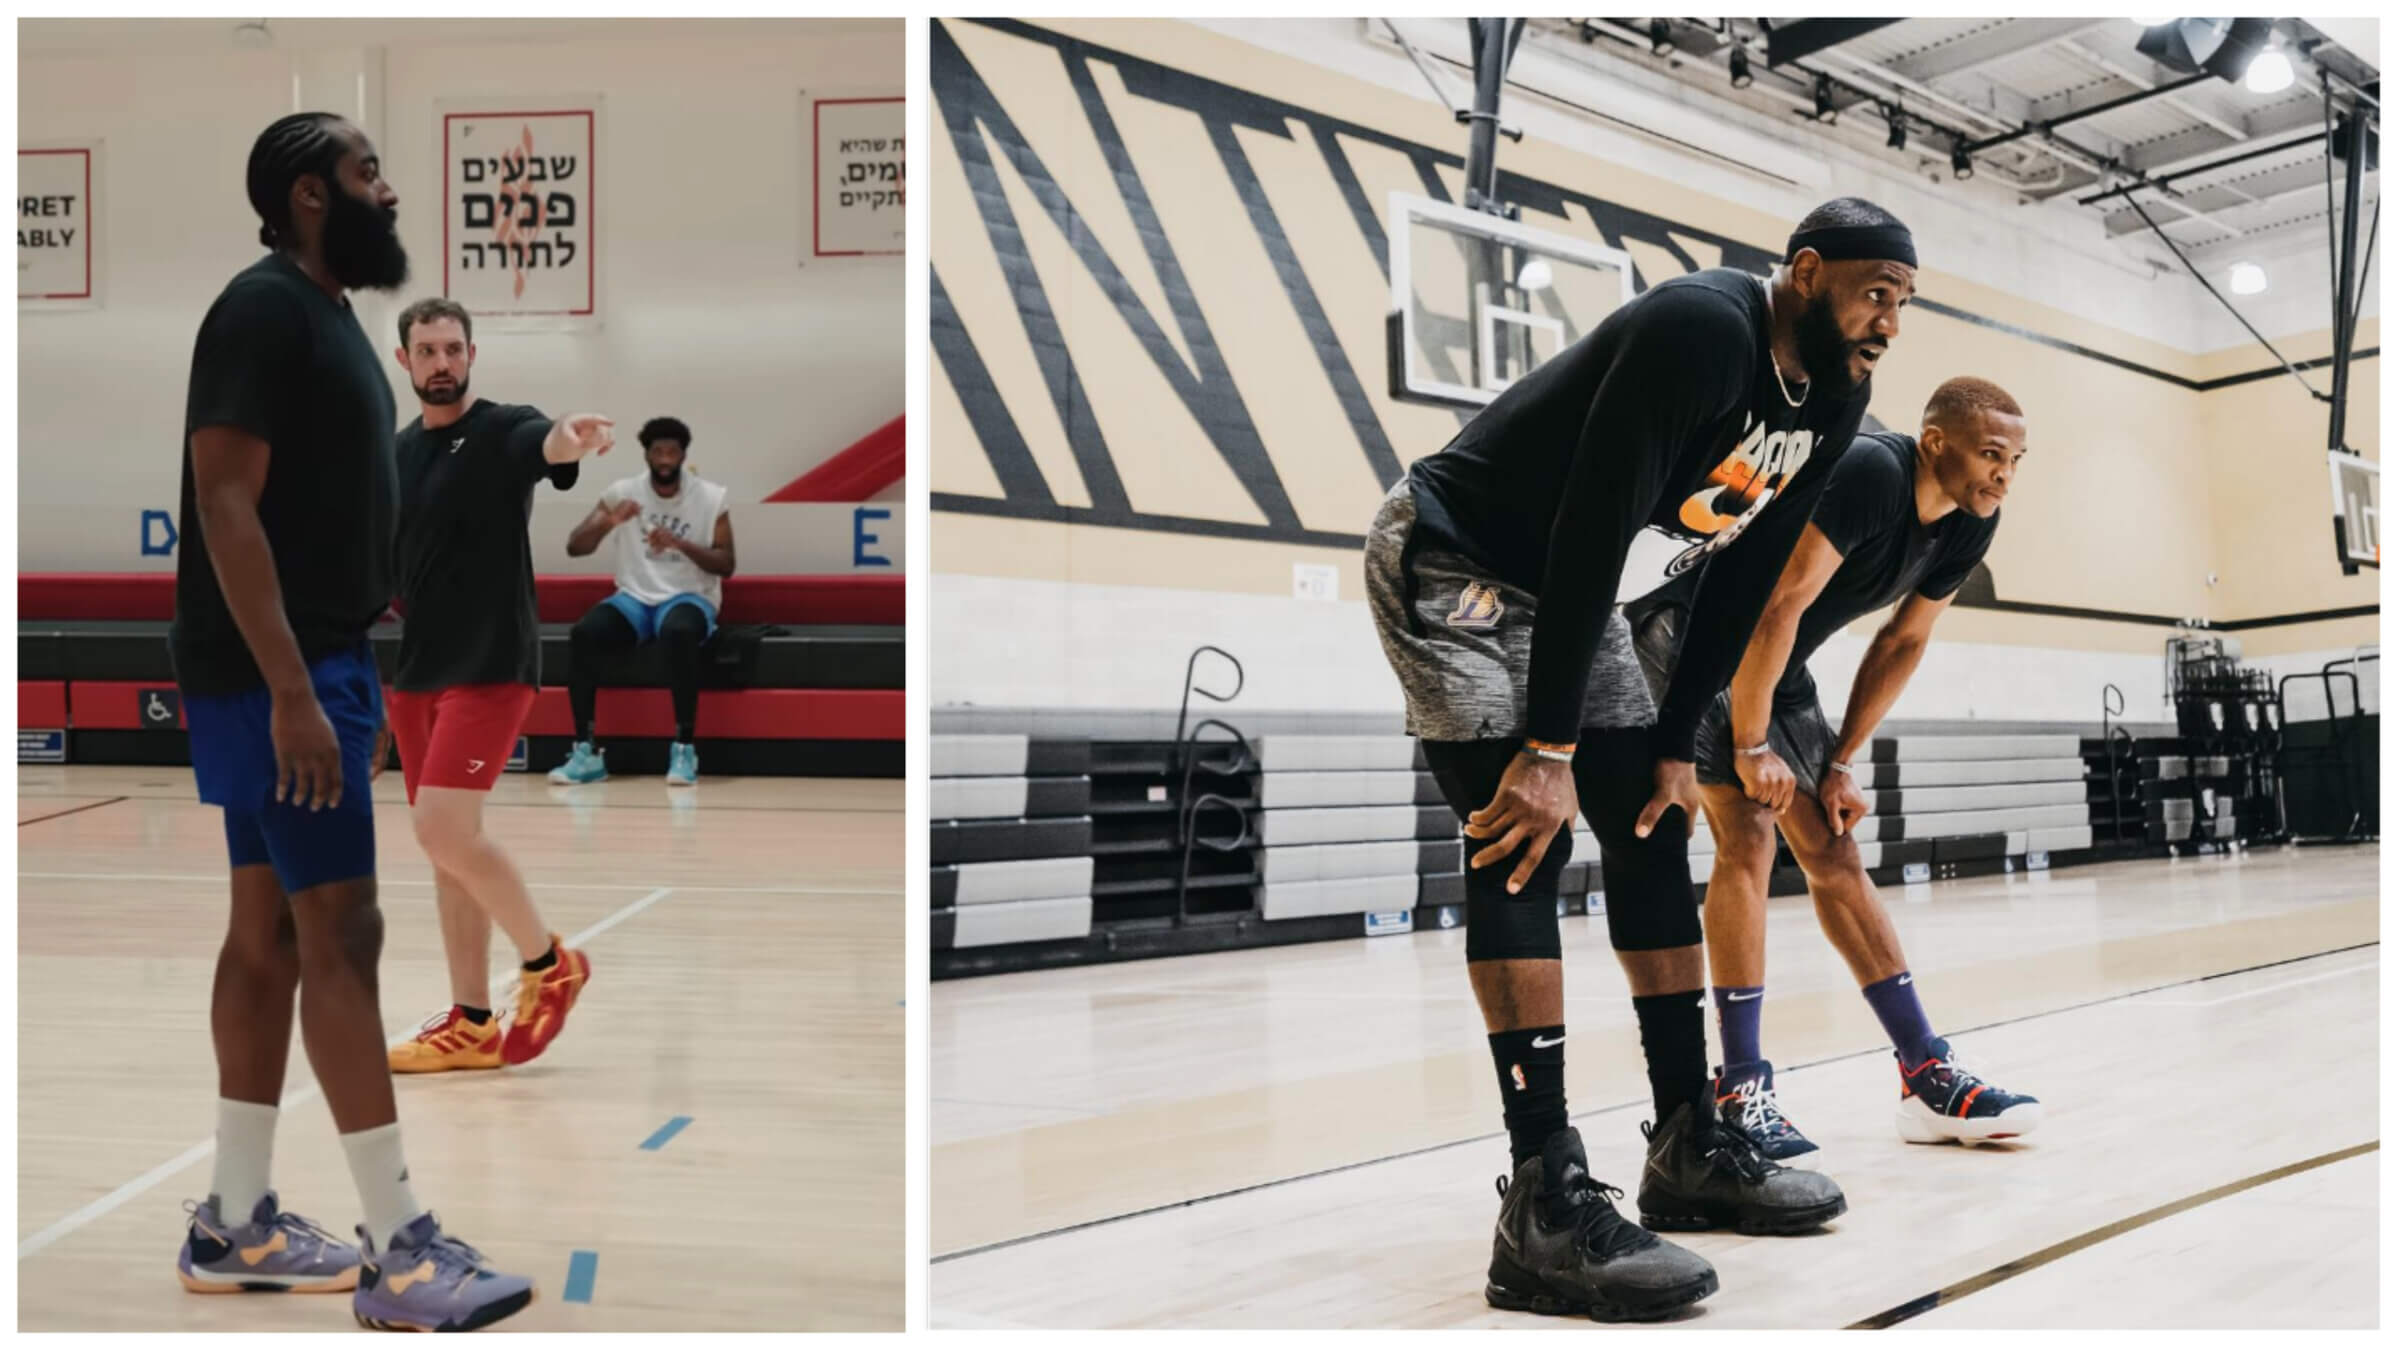 Left: James Harden awaits instruction from Drew Hanlen as Joel Embiid (background) takes a water break at Shalhevet. Right: LeBron James and Russell Westbrook in the YULA gym in summer 2021. (Both photos via Instagram.)